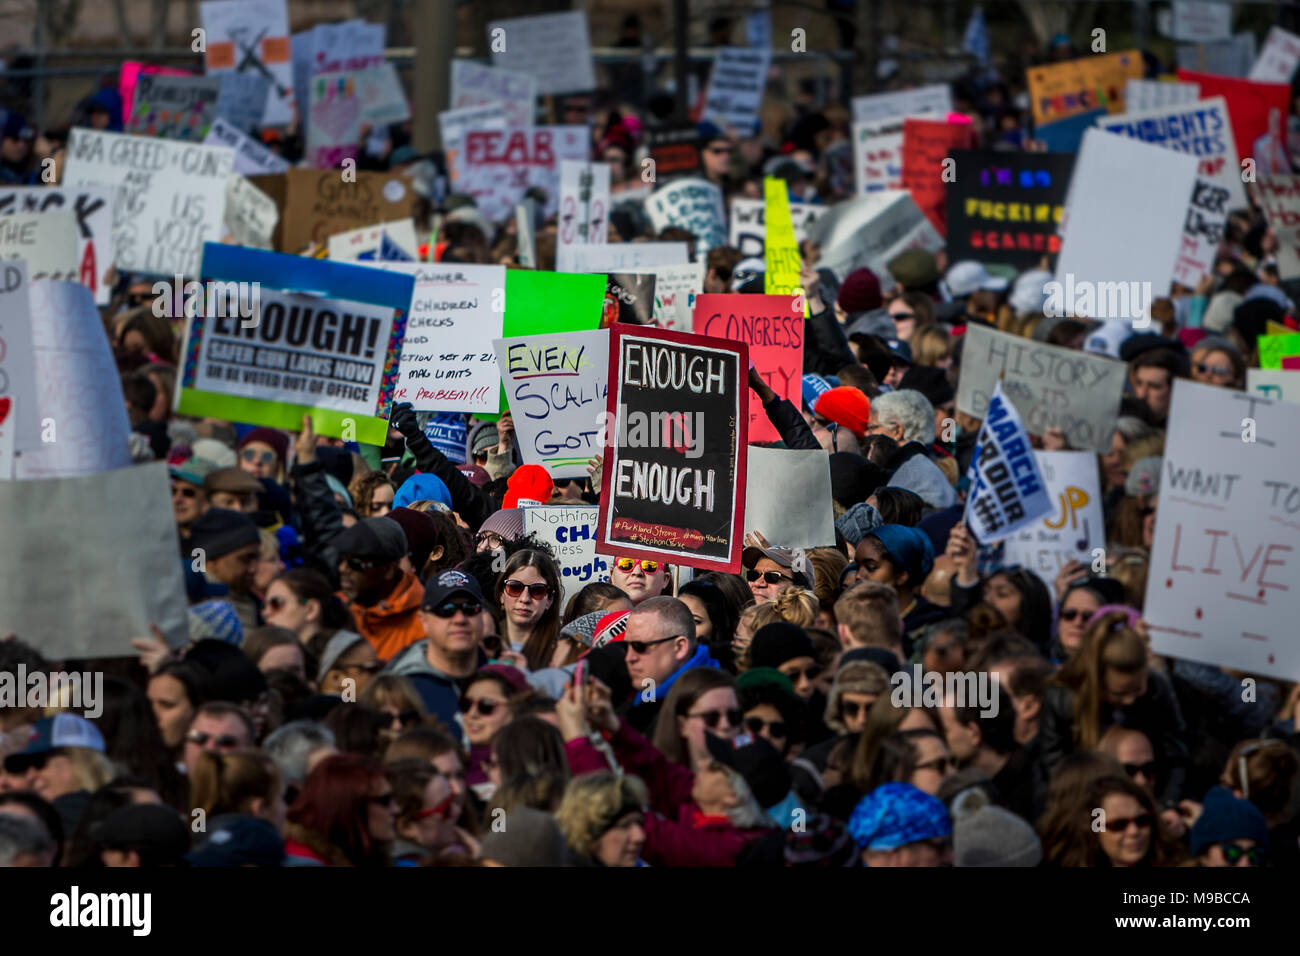 Washington Dc, United States. 24th Mar, 2018. Students from Marjory Stoneman Douglas High School in Florida, the scene of a mass shooting Feb. 14, were joined by over 800 thousand people as they march in a nationwide protest demanding sensible gun control laws. More than 830 protests occurred, in every American state and globally. The march follows a nationwide student walkout earlier this month. Another walkout is planned for April 20, the 19th anniversary of the mass shooting at Columbine High School in Colorado. Credit: Michael Nigro/Pacific Press/Alamy Live News Stock Photo